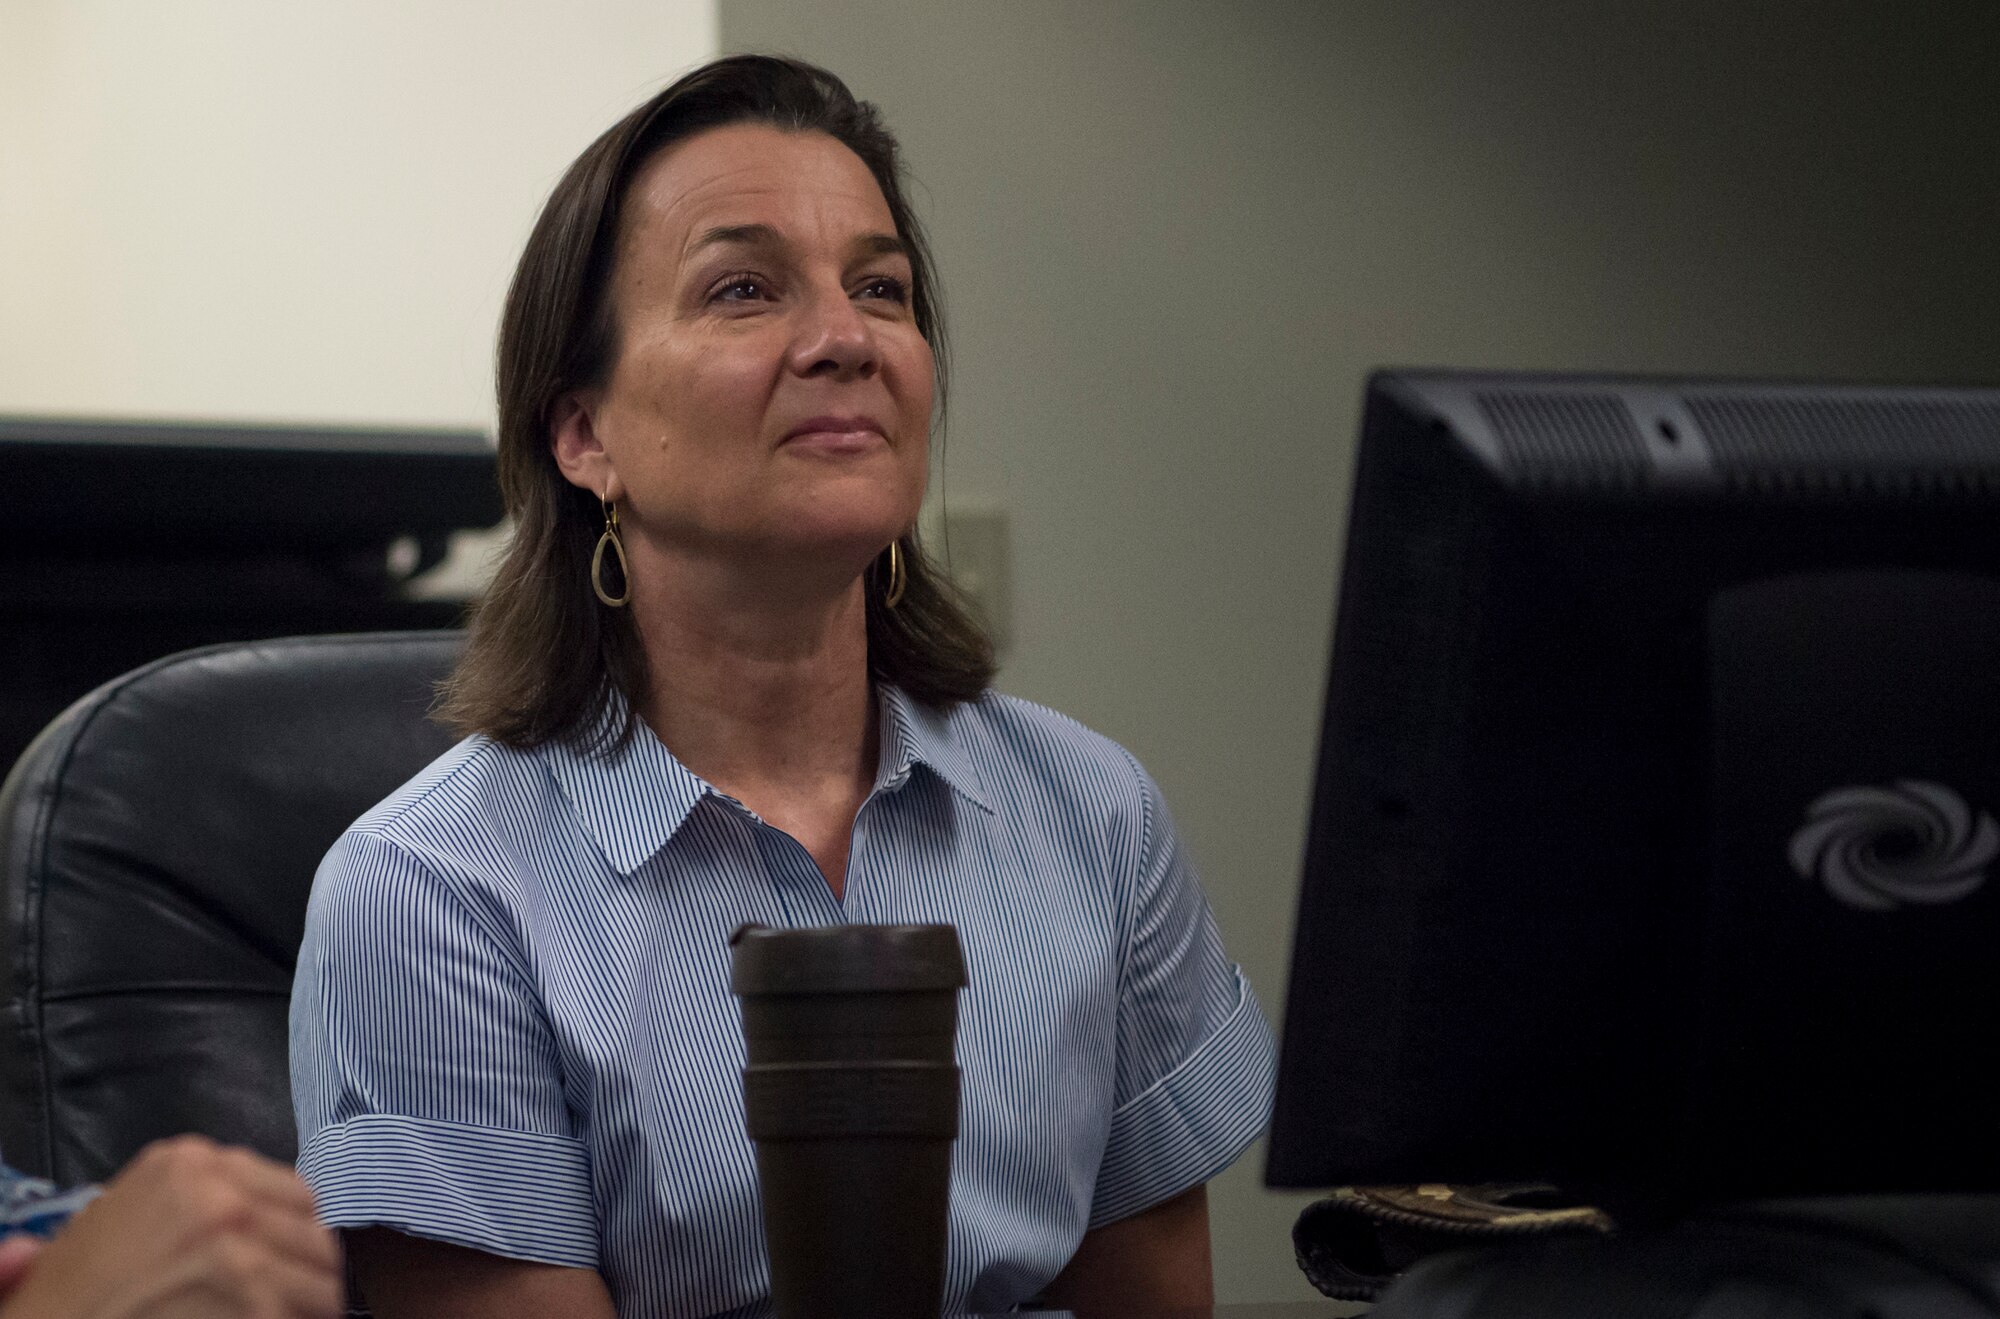 Sara Holmes, wife of U.S. Air Force Gen. Mike Holmes, commander of Air Combat Command, attends a mission brief during a visit to the 363rd Intelligence Surveillance Reconnaissance Wing at Joint Base Langley-Eustis, Virginia, Sept. 5, 2018. During the visit, Holmes also met with spouses to discuss the key spouse program and efforts to improve Airman and family resiliency within the 363rd ISRW. (U.S. Air Force photo by Staff Sgt. Areca T. Bell)